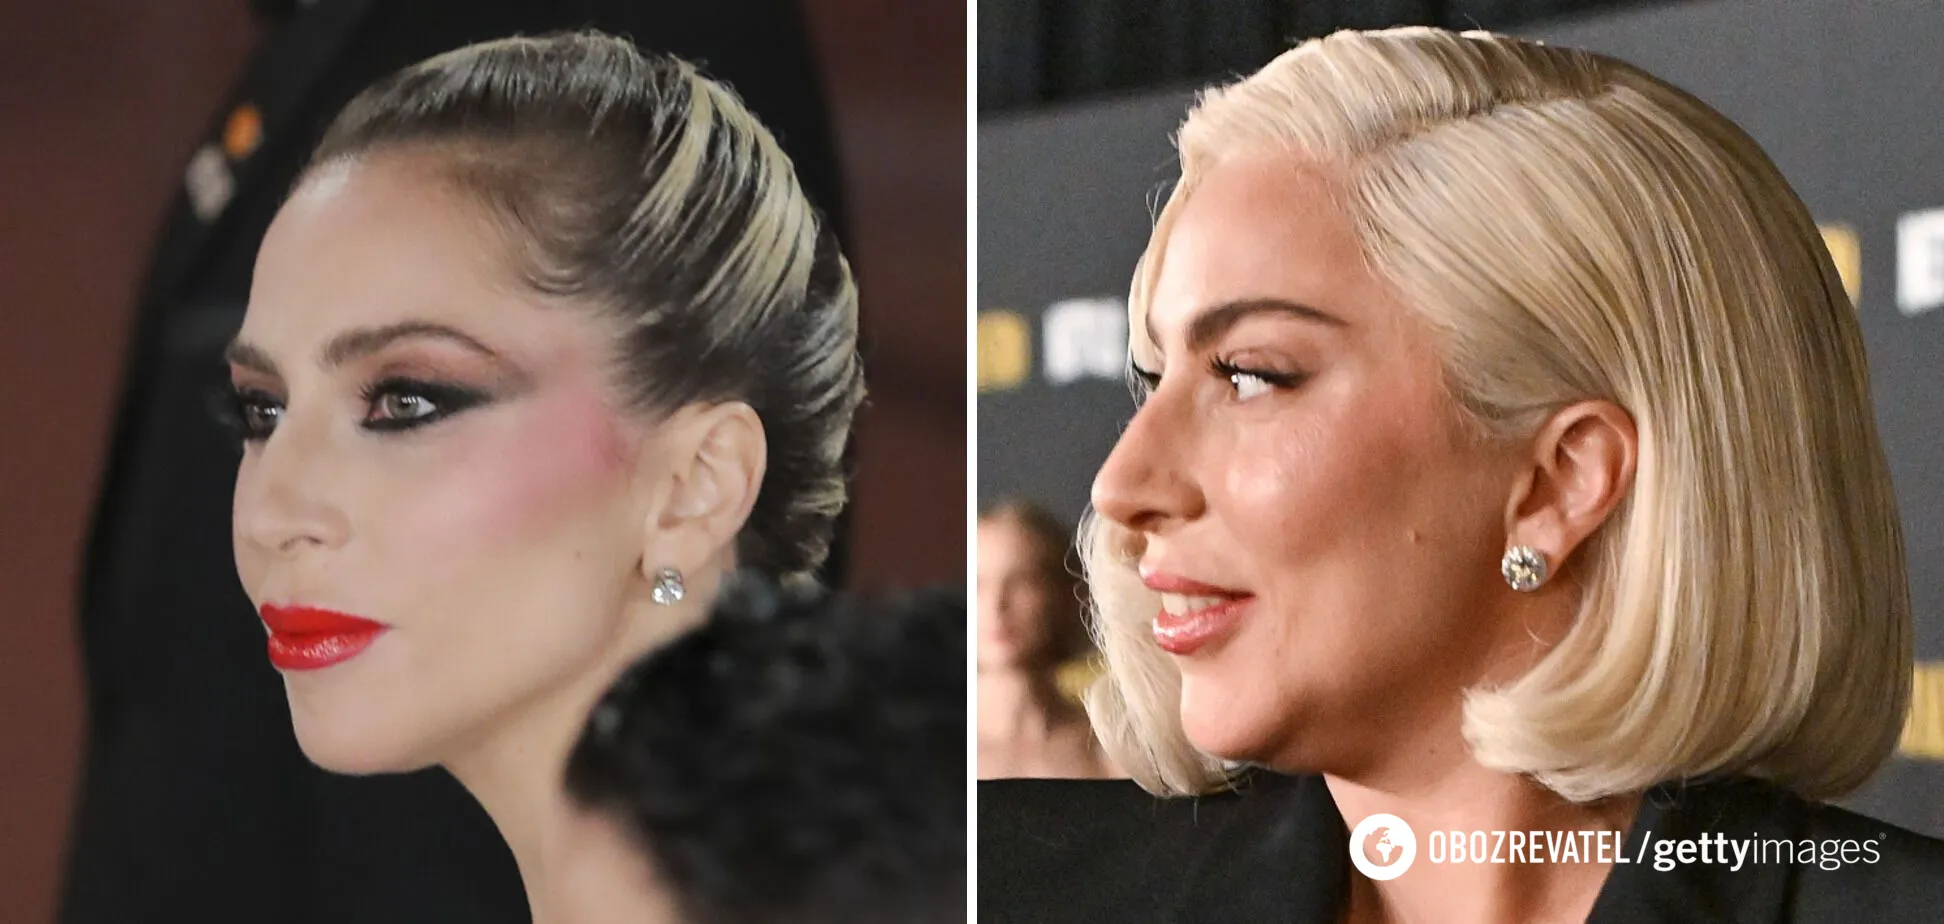 Lady Gaga, 37, disappointed fans with Botox and fillers in her face. Photos before and after